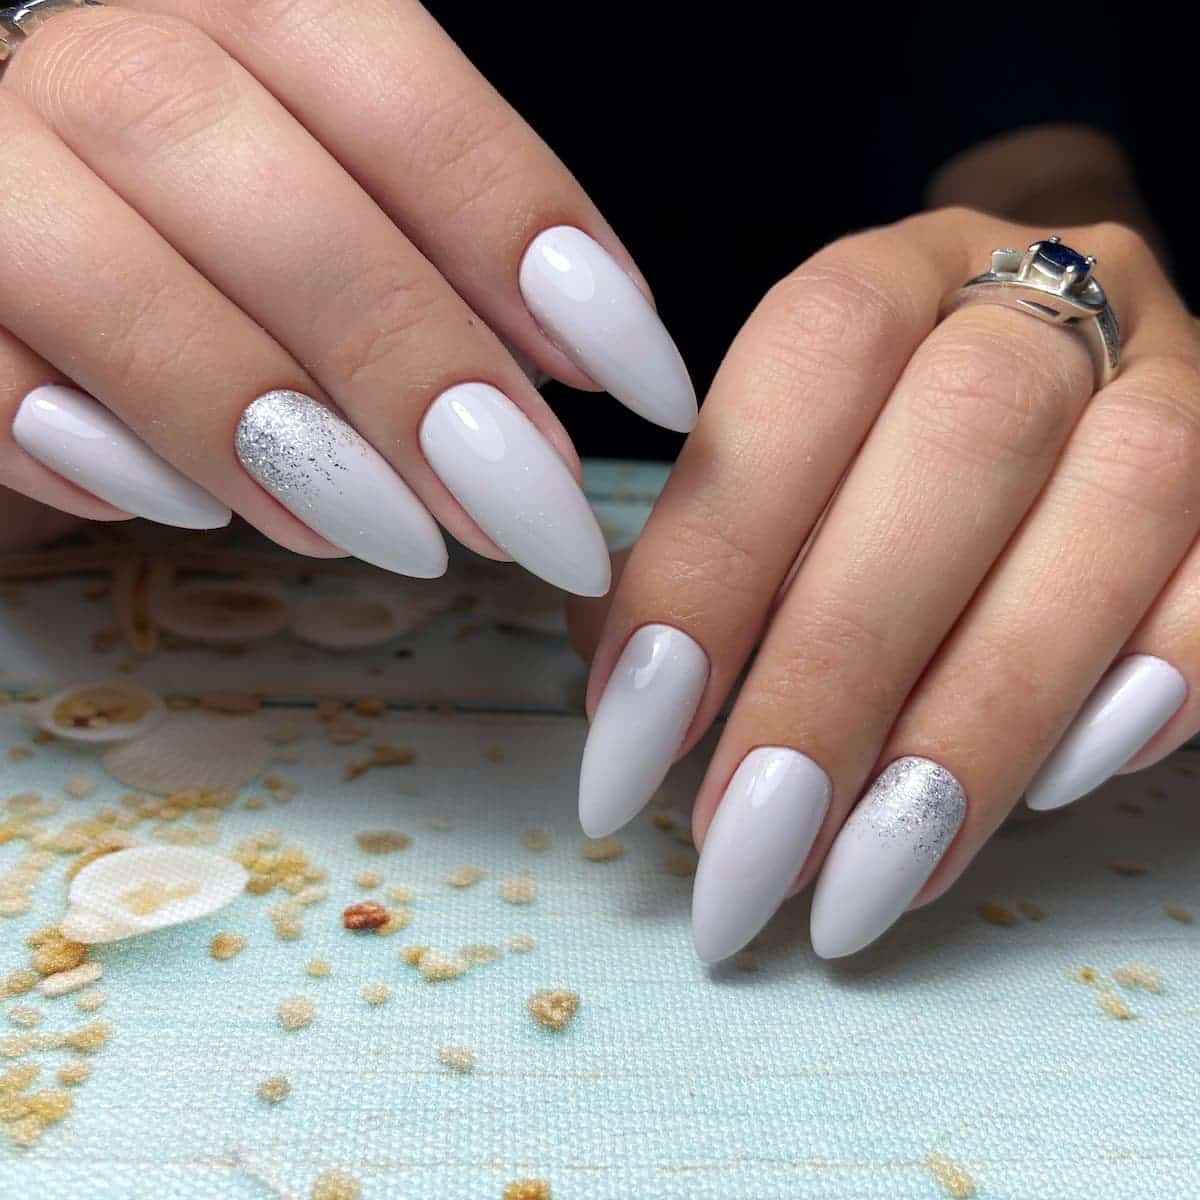 45 Stunning Long Almond Nails That We Totally Love!